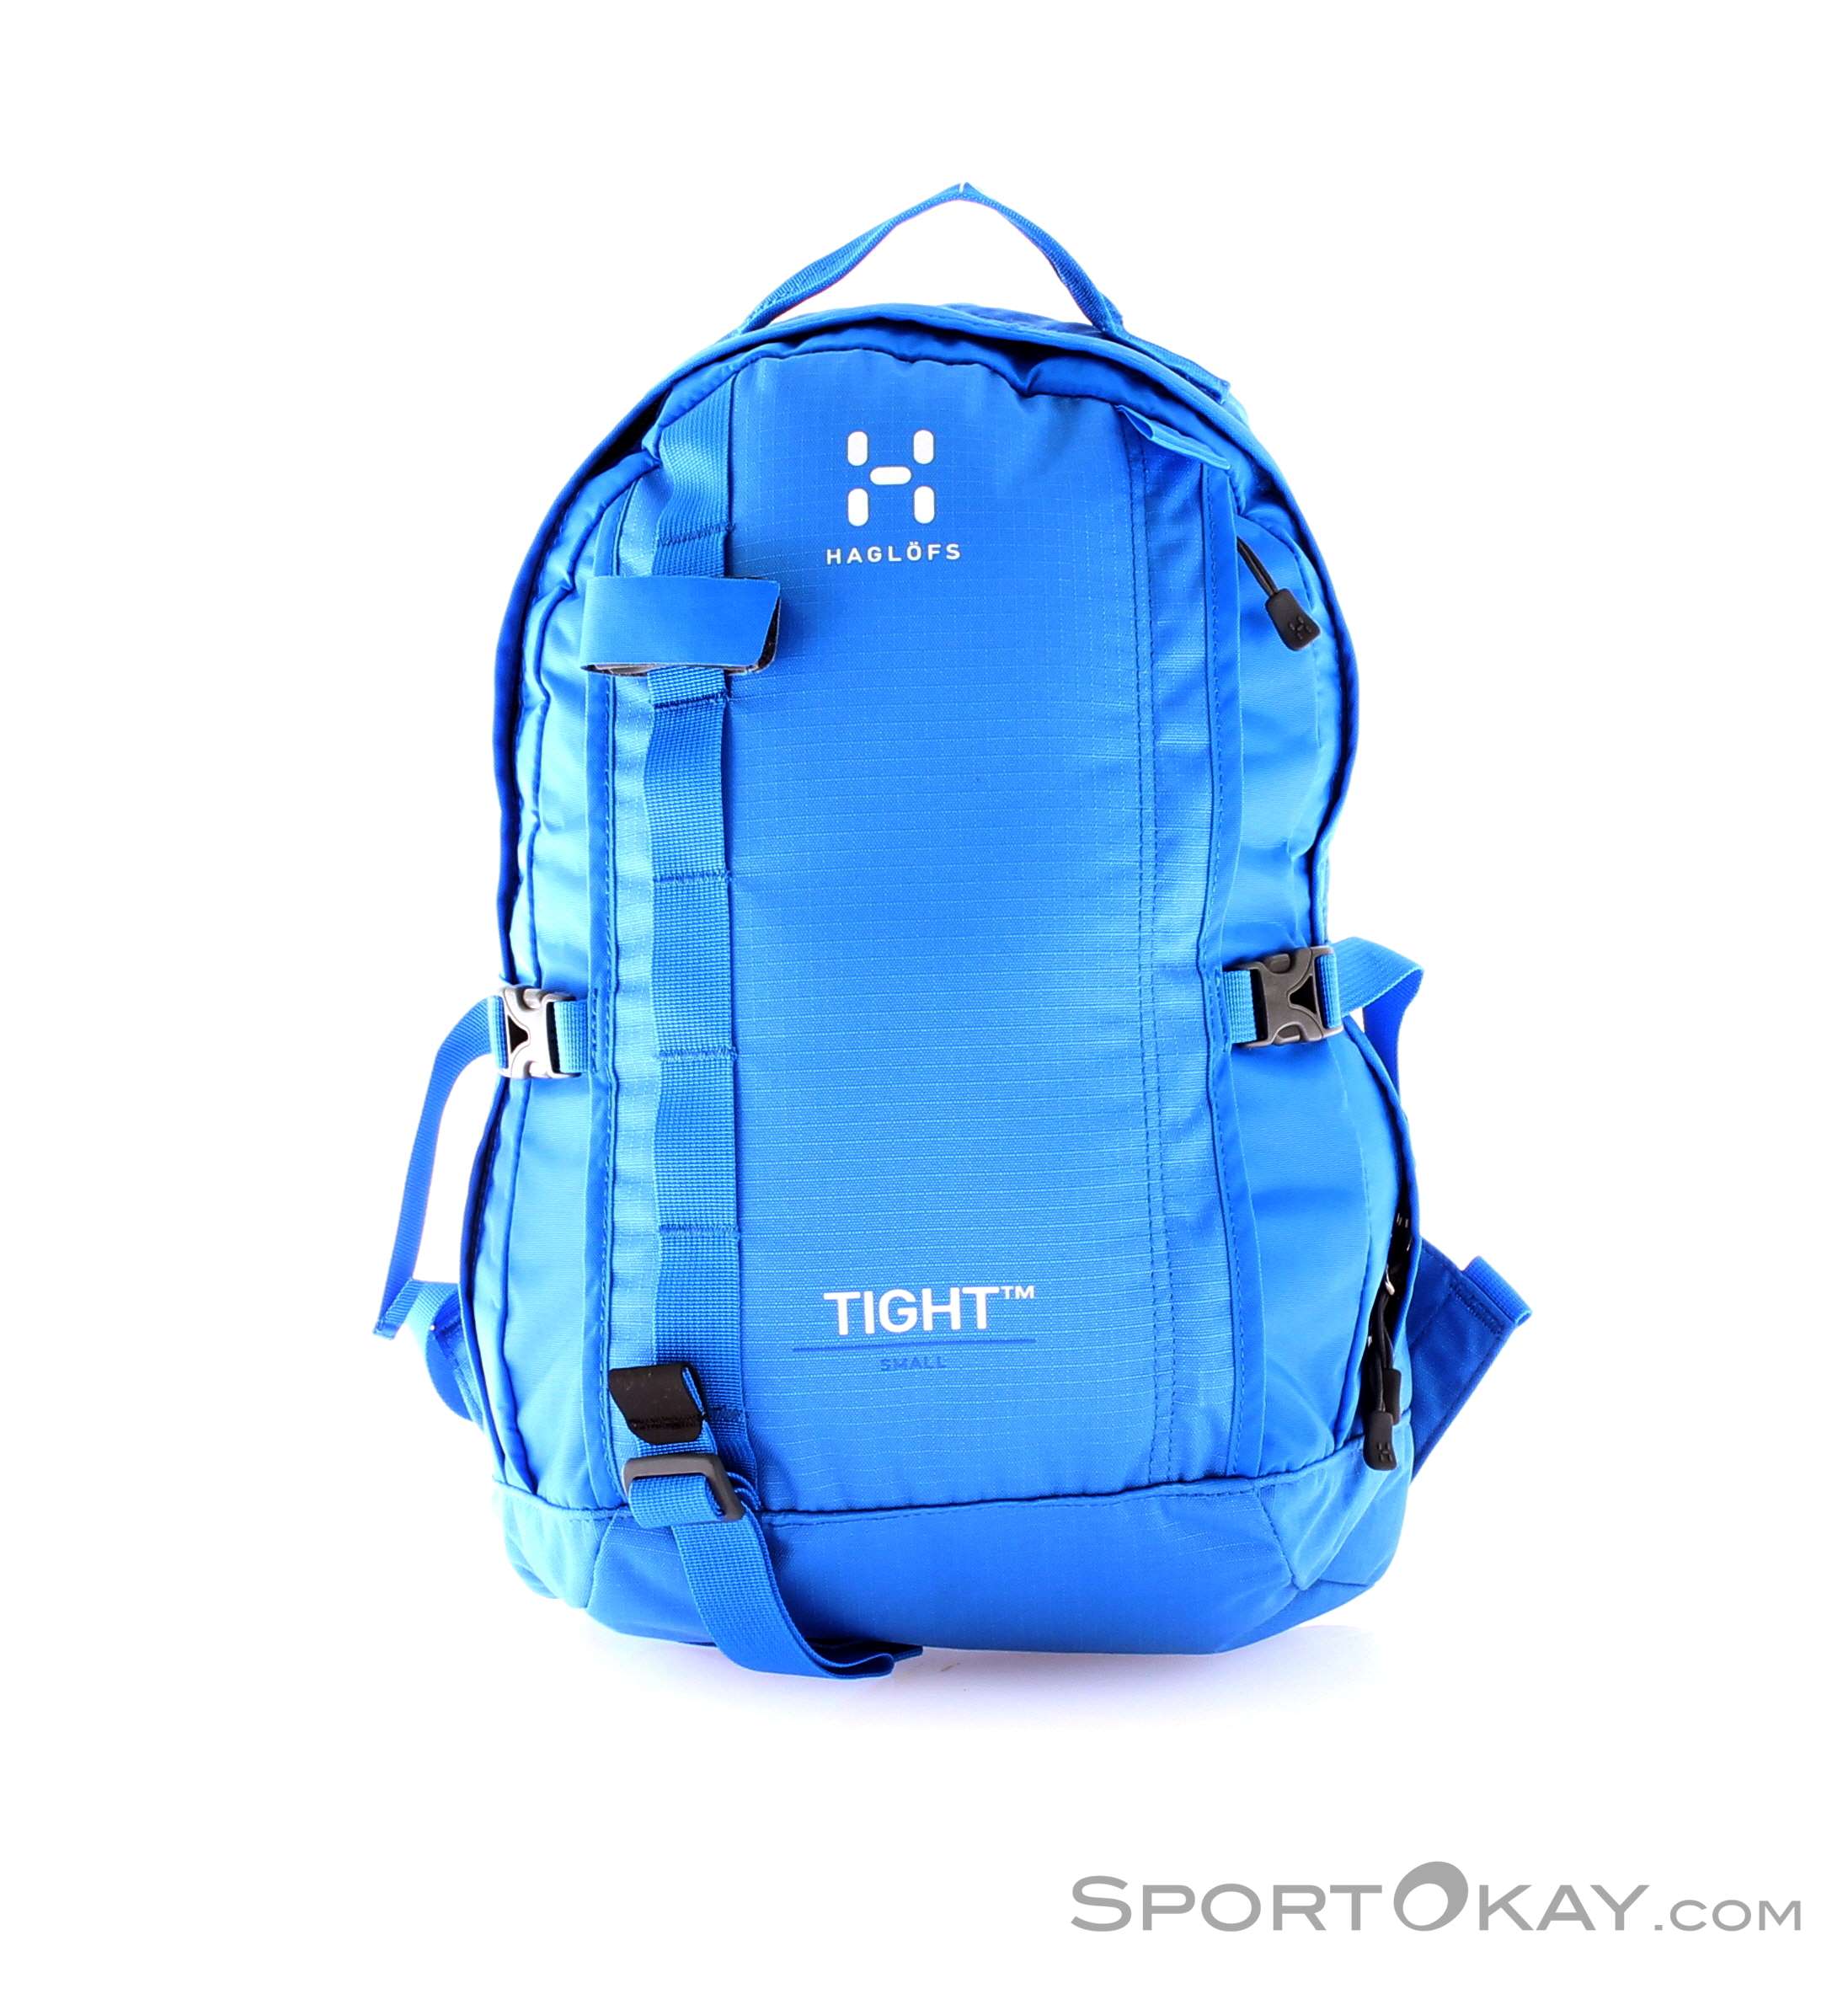 Haglöfs Tight Small 15l Backpack - & Backpacks - Accessory - Fitness - All